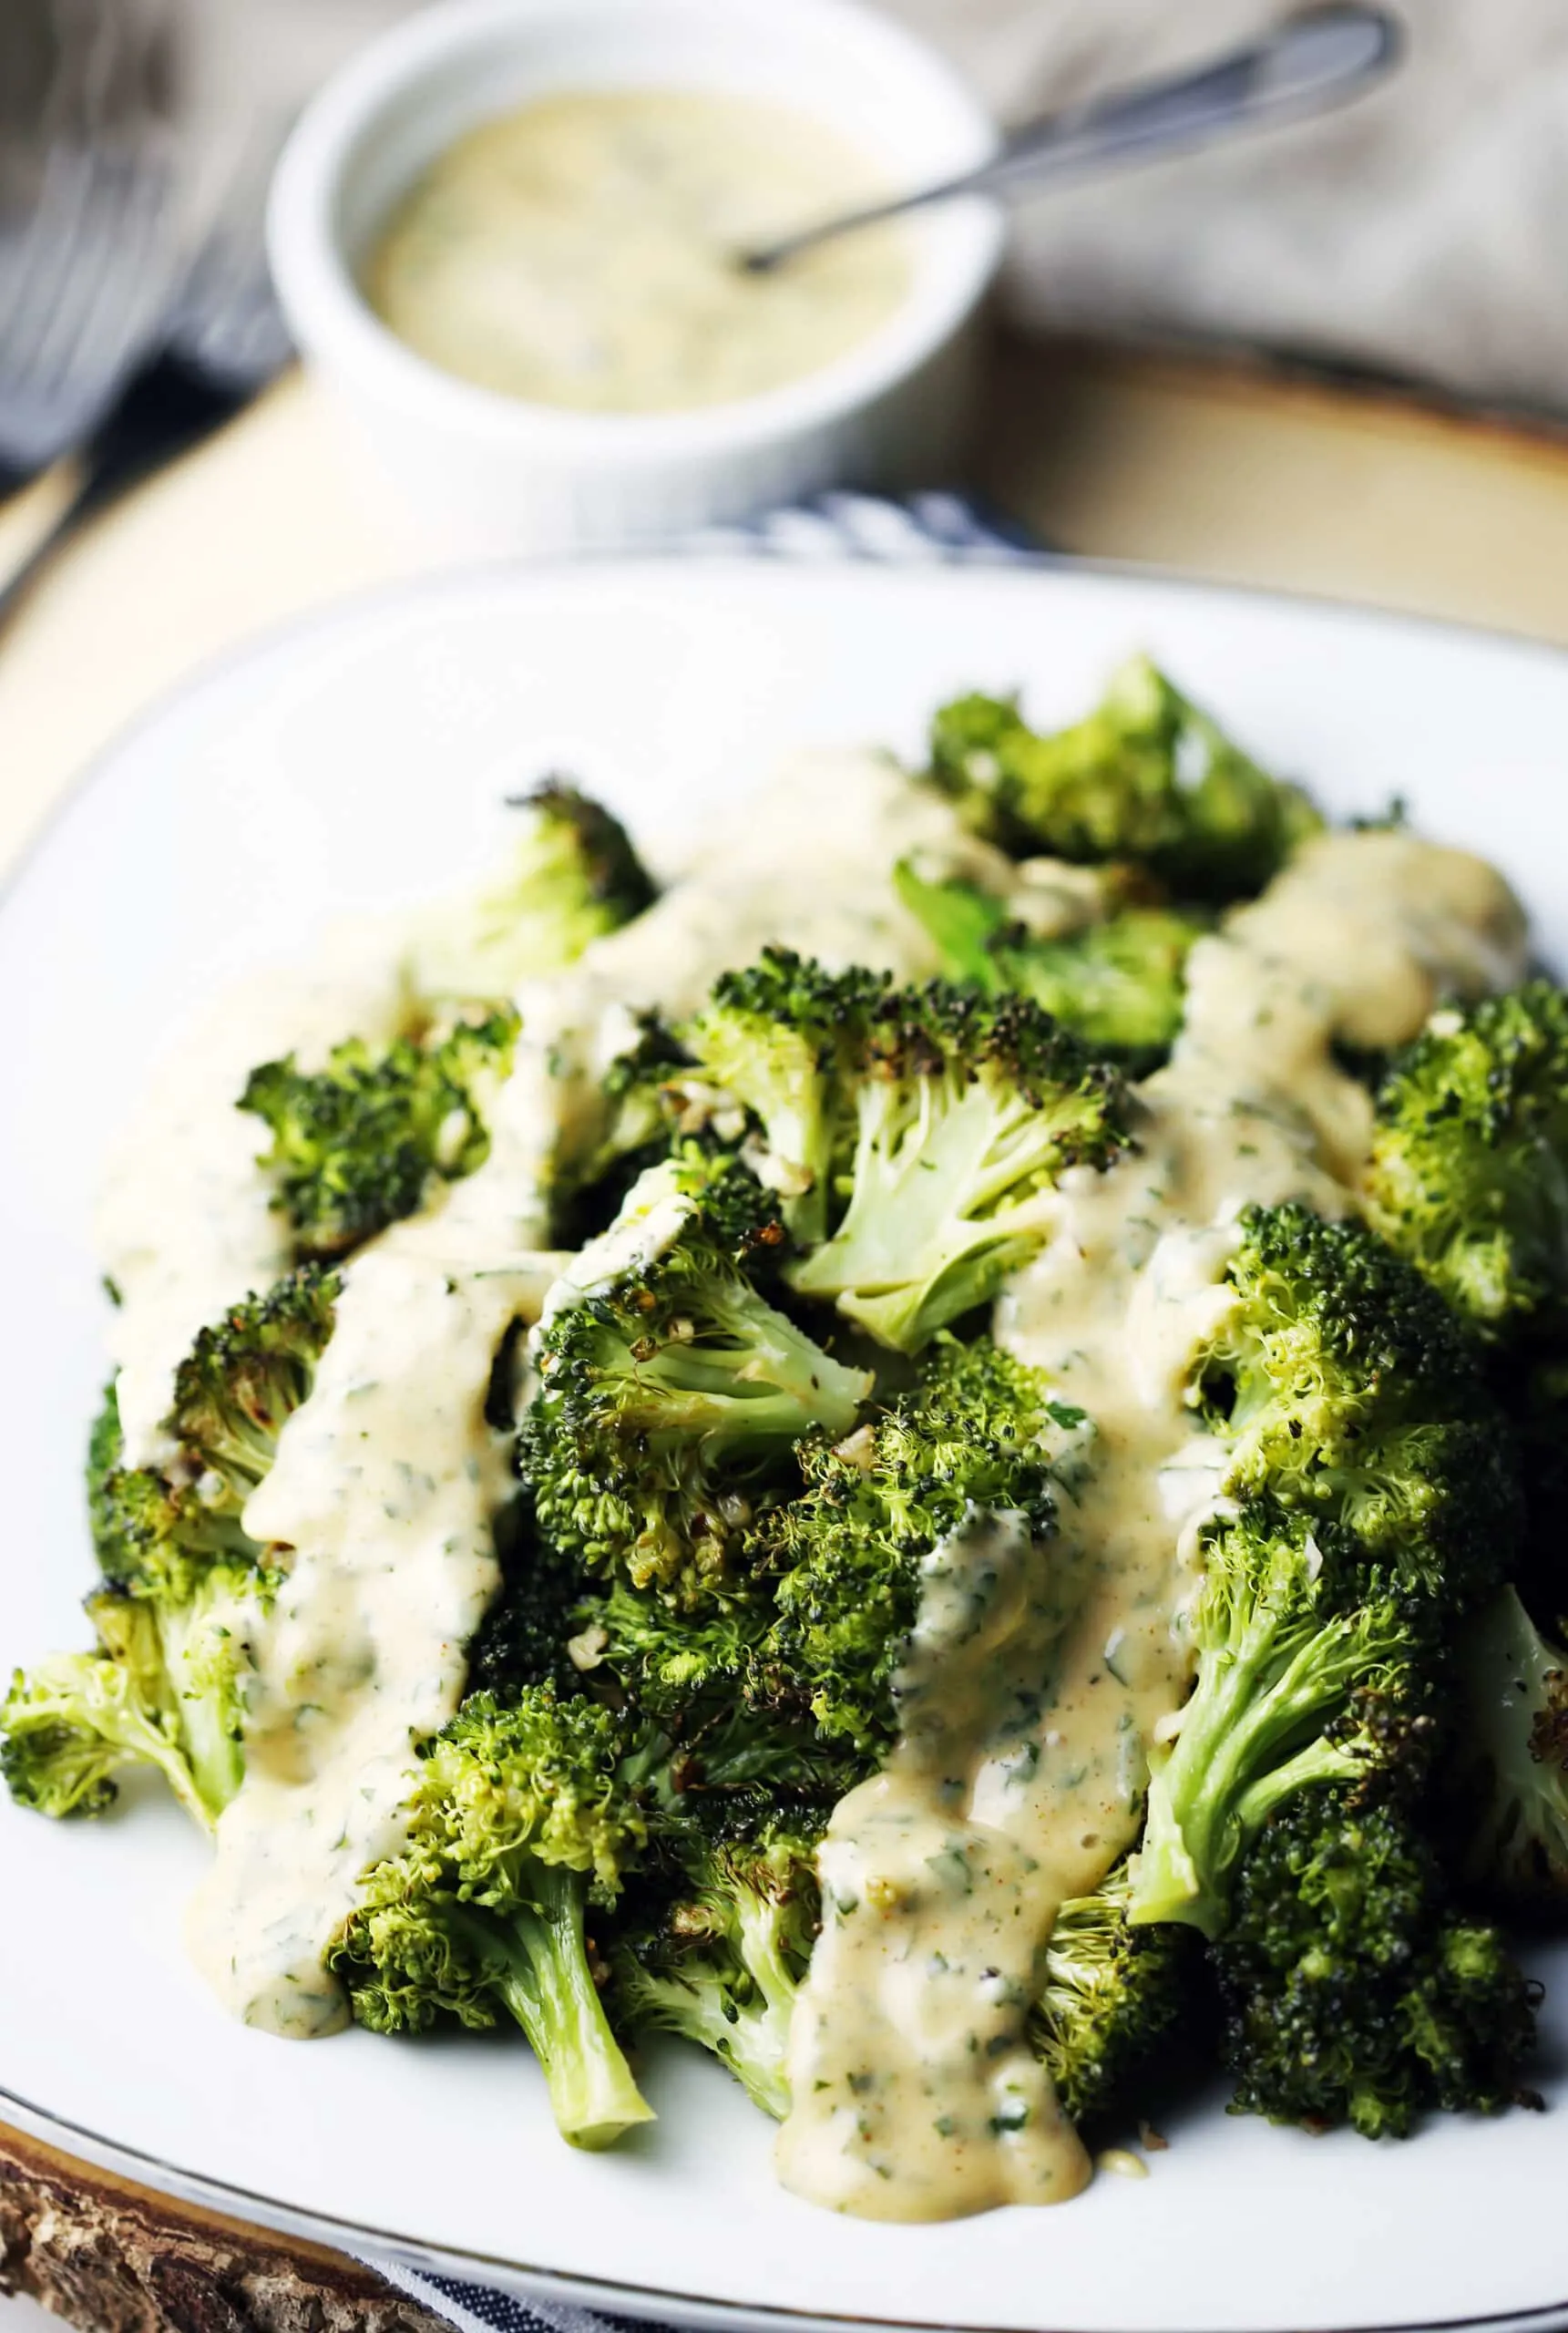 A side view of roasted broccoli topped with hollandaise sauce on a white plate.